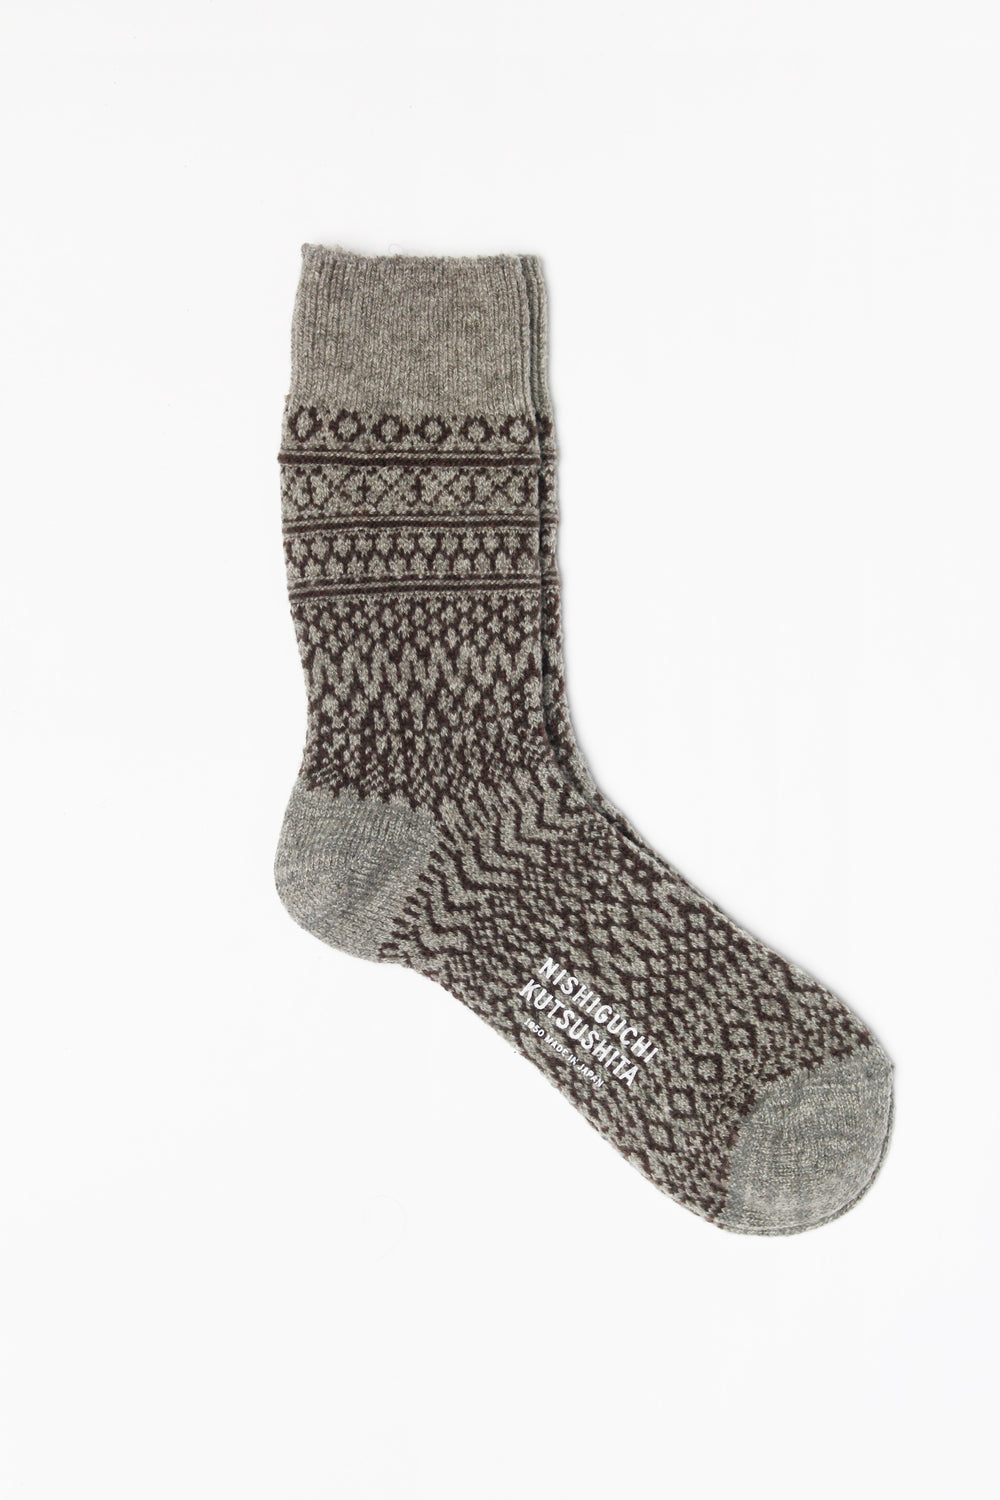 Wool Jacquard Socks, Grey with Brown ( Size M + L Only )